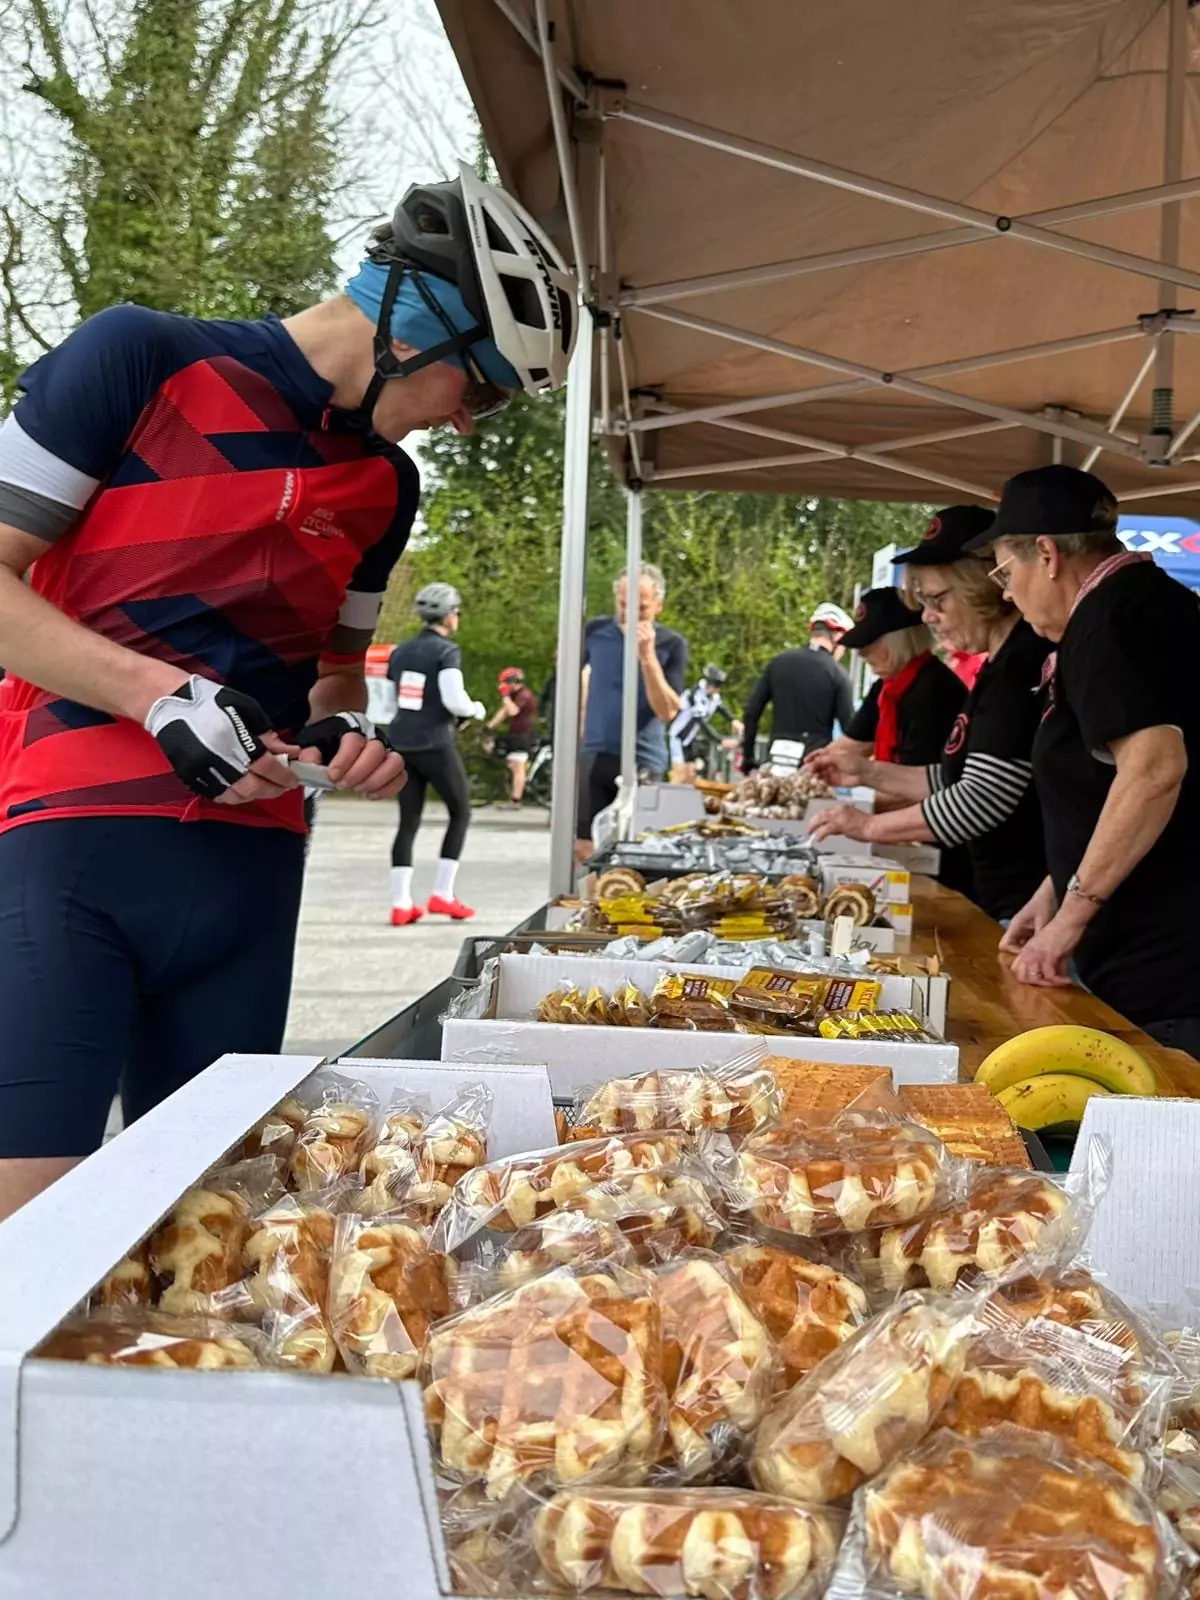 A cyclist perusing trestle tables covered in various pastries and fruit